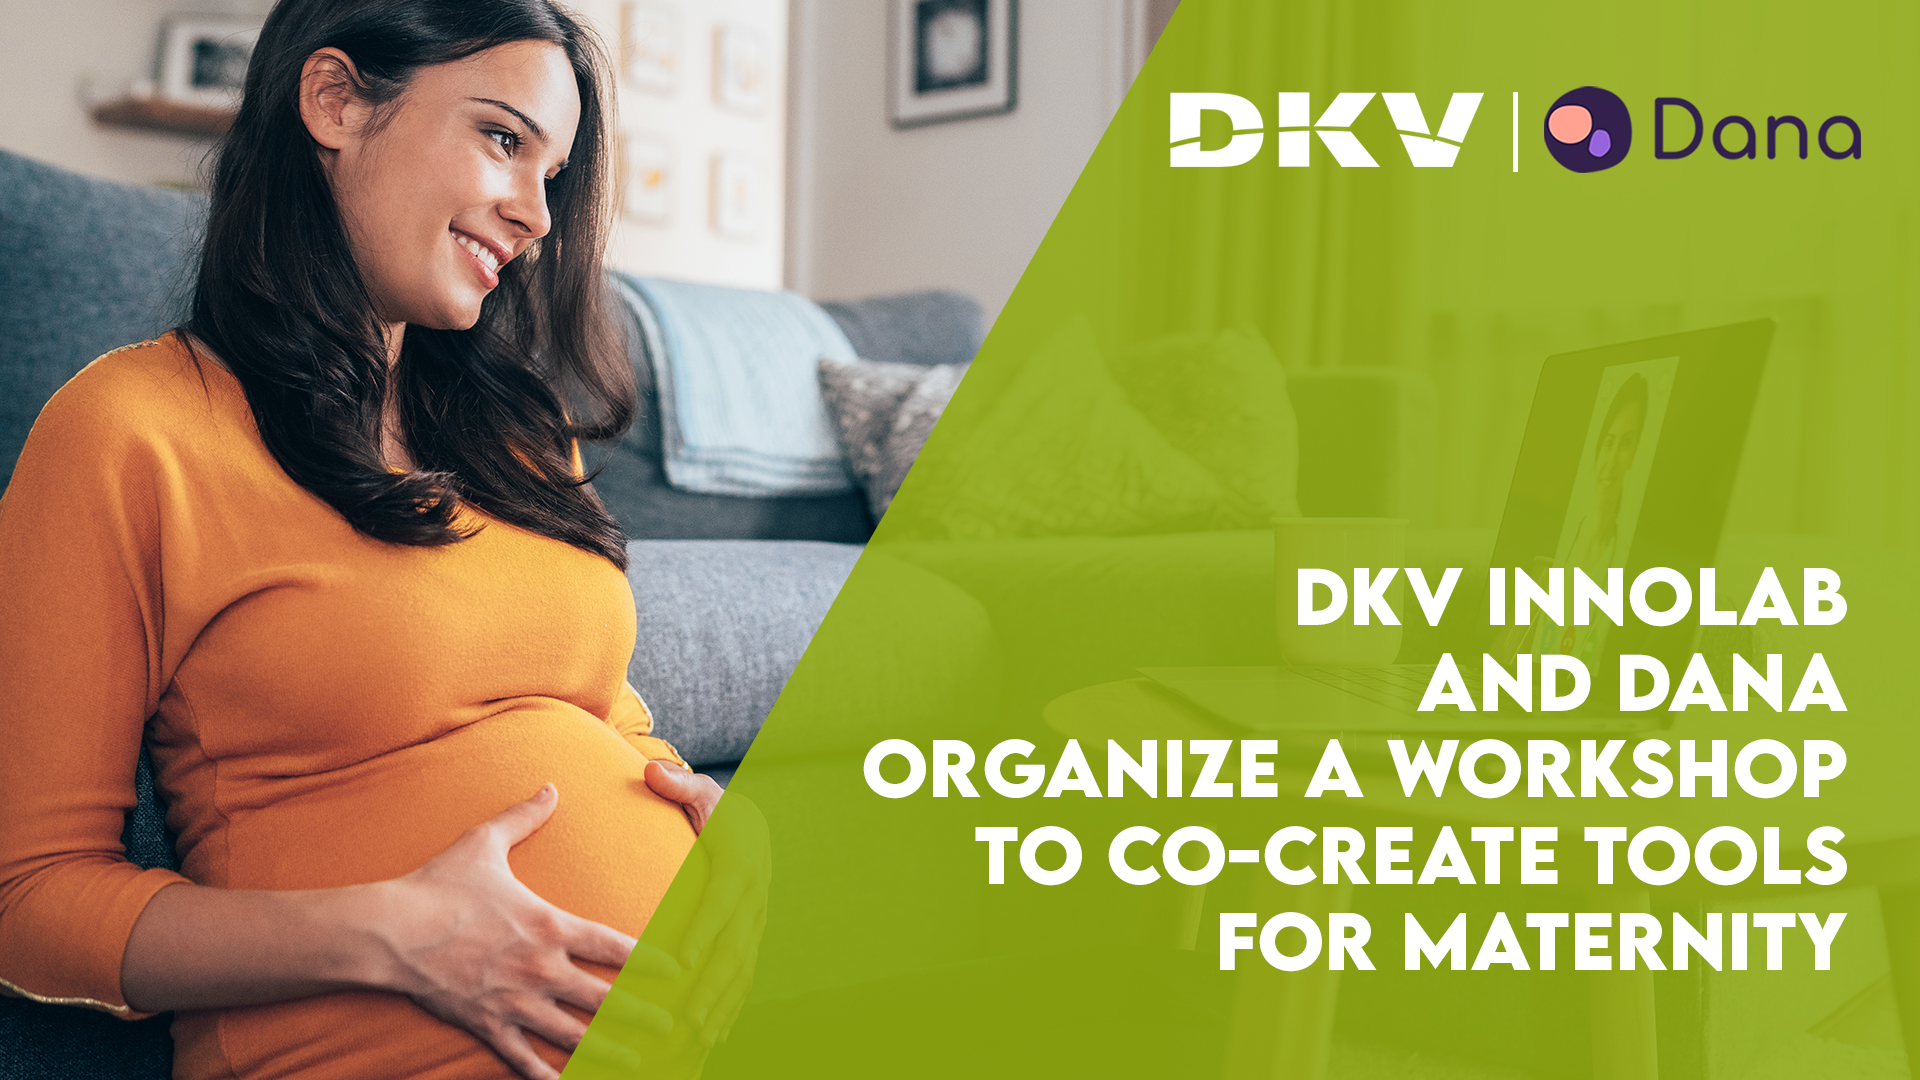 DKV Innolab and Dana organize a workshop to co-create tools for maternity - #BHHMembersInitiatives